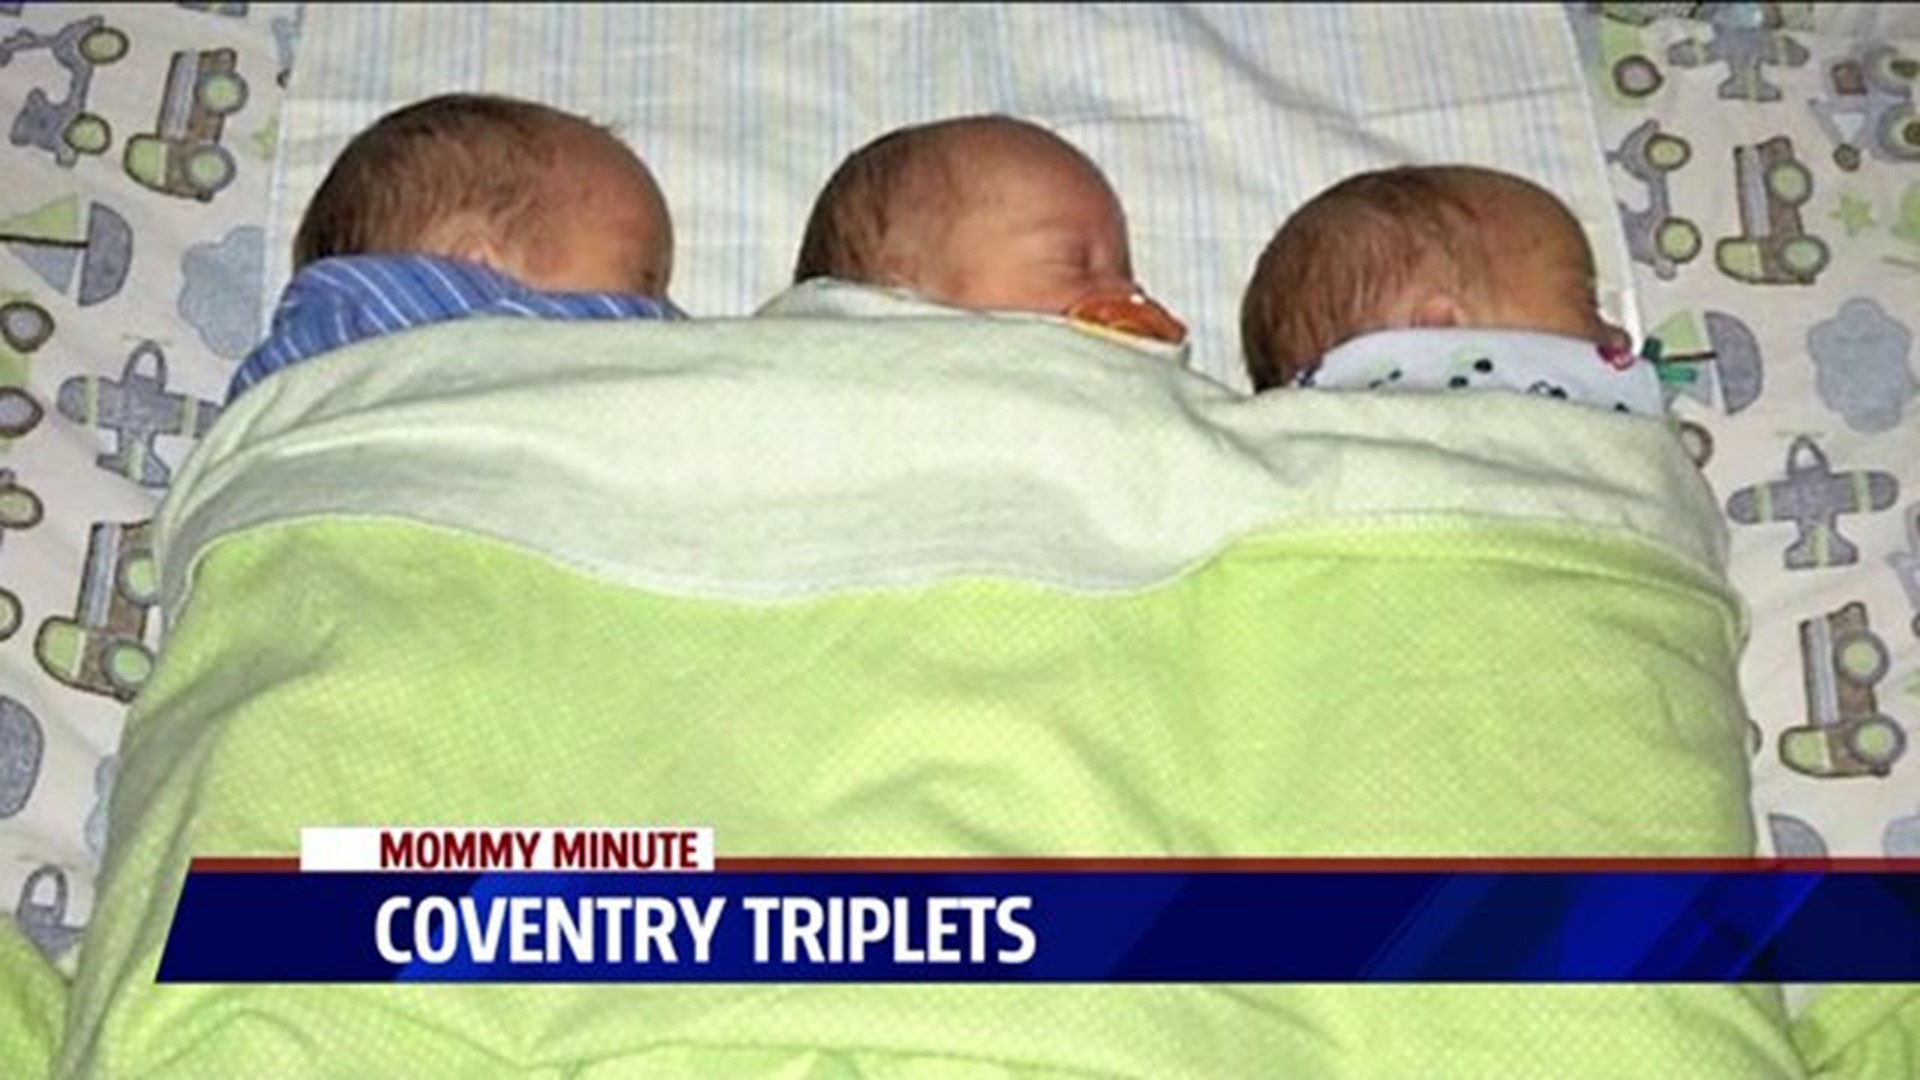 Mommy Minute: Coventry triplets